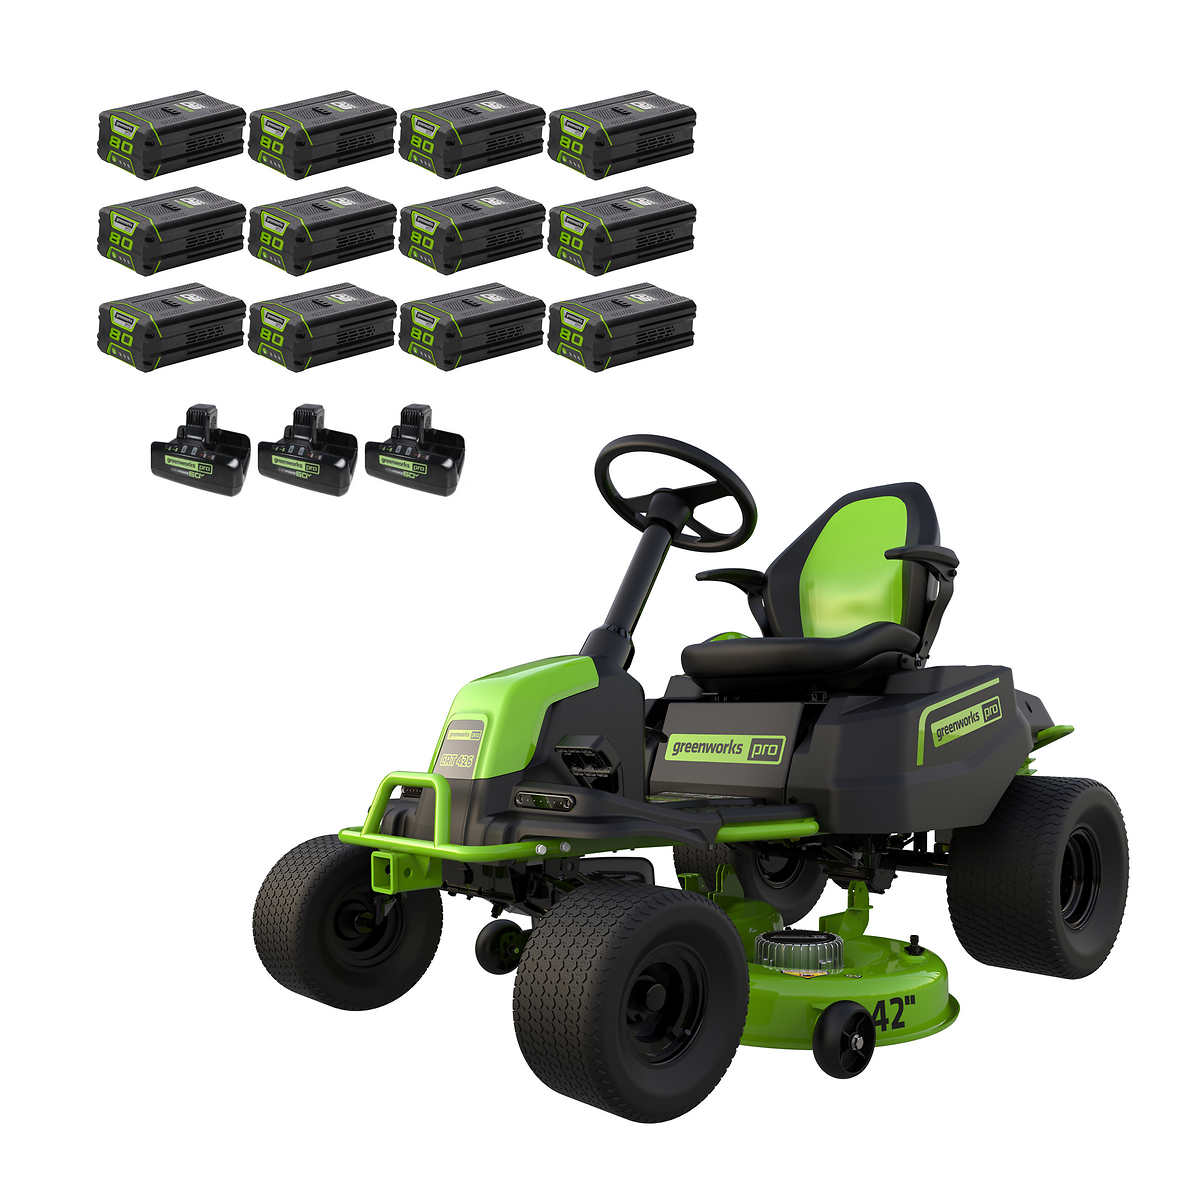 Greenworks 80V 42 Riding Lawn Tractor With 12 4AH Batteries and 3